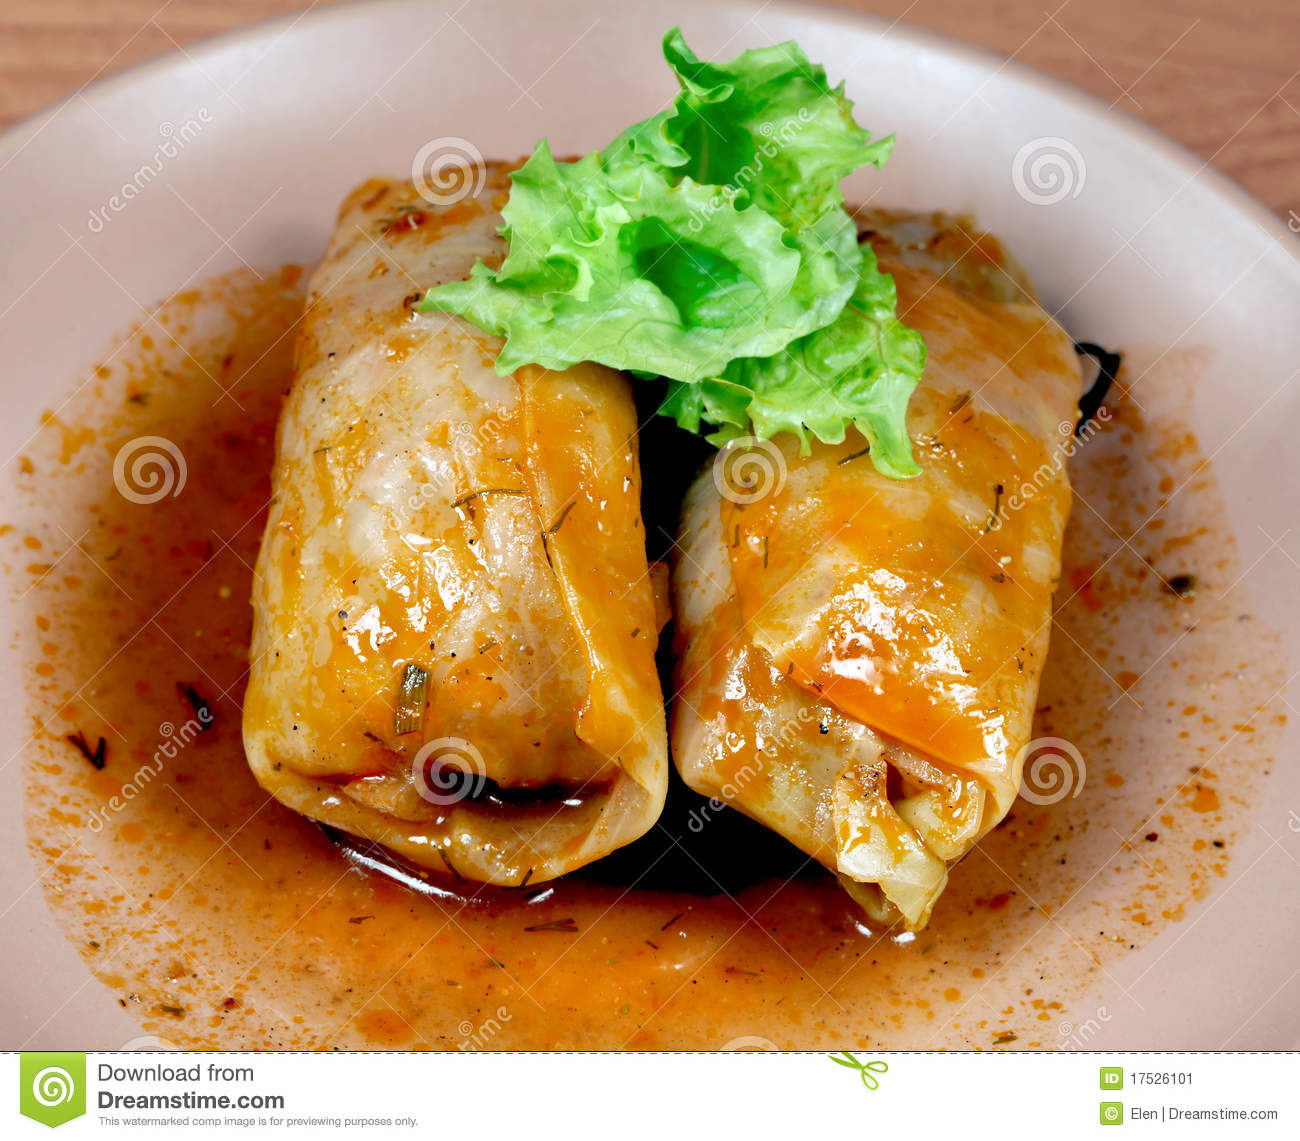 Russian Rolls   Goloubets Of Cabbage And Meat Stock Image   Image